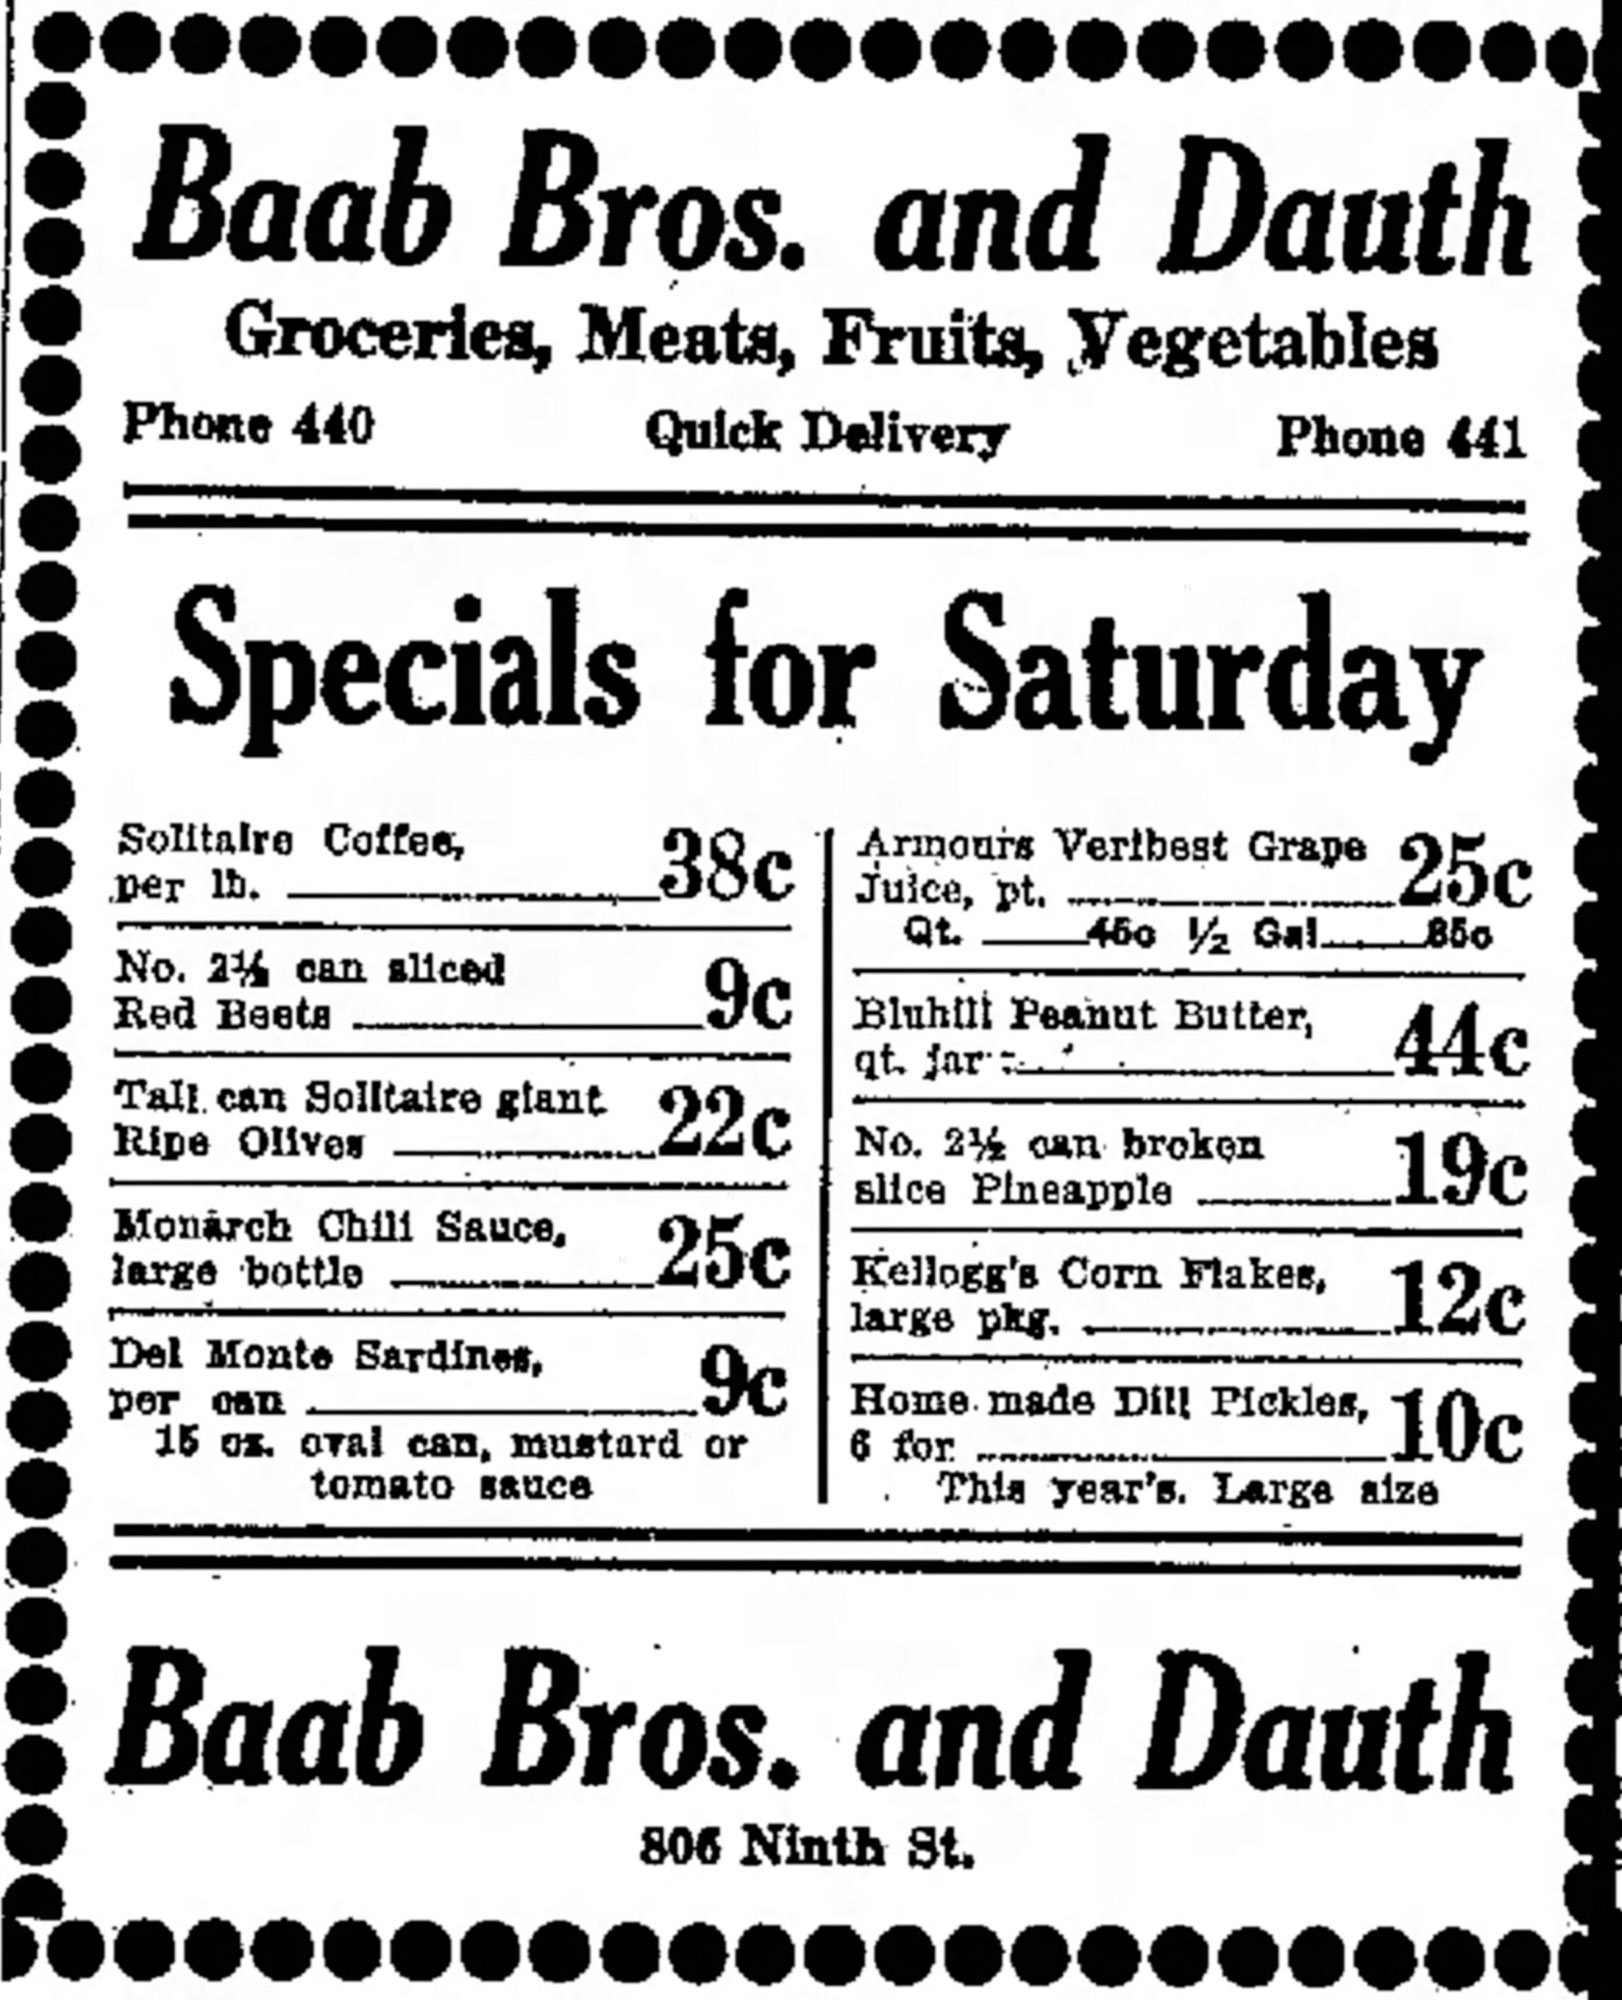 Dauth Family Archive - 1931-08-28 - Greeley Daily Tribune - Baab Bros and Dauth Advertisement